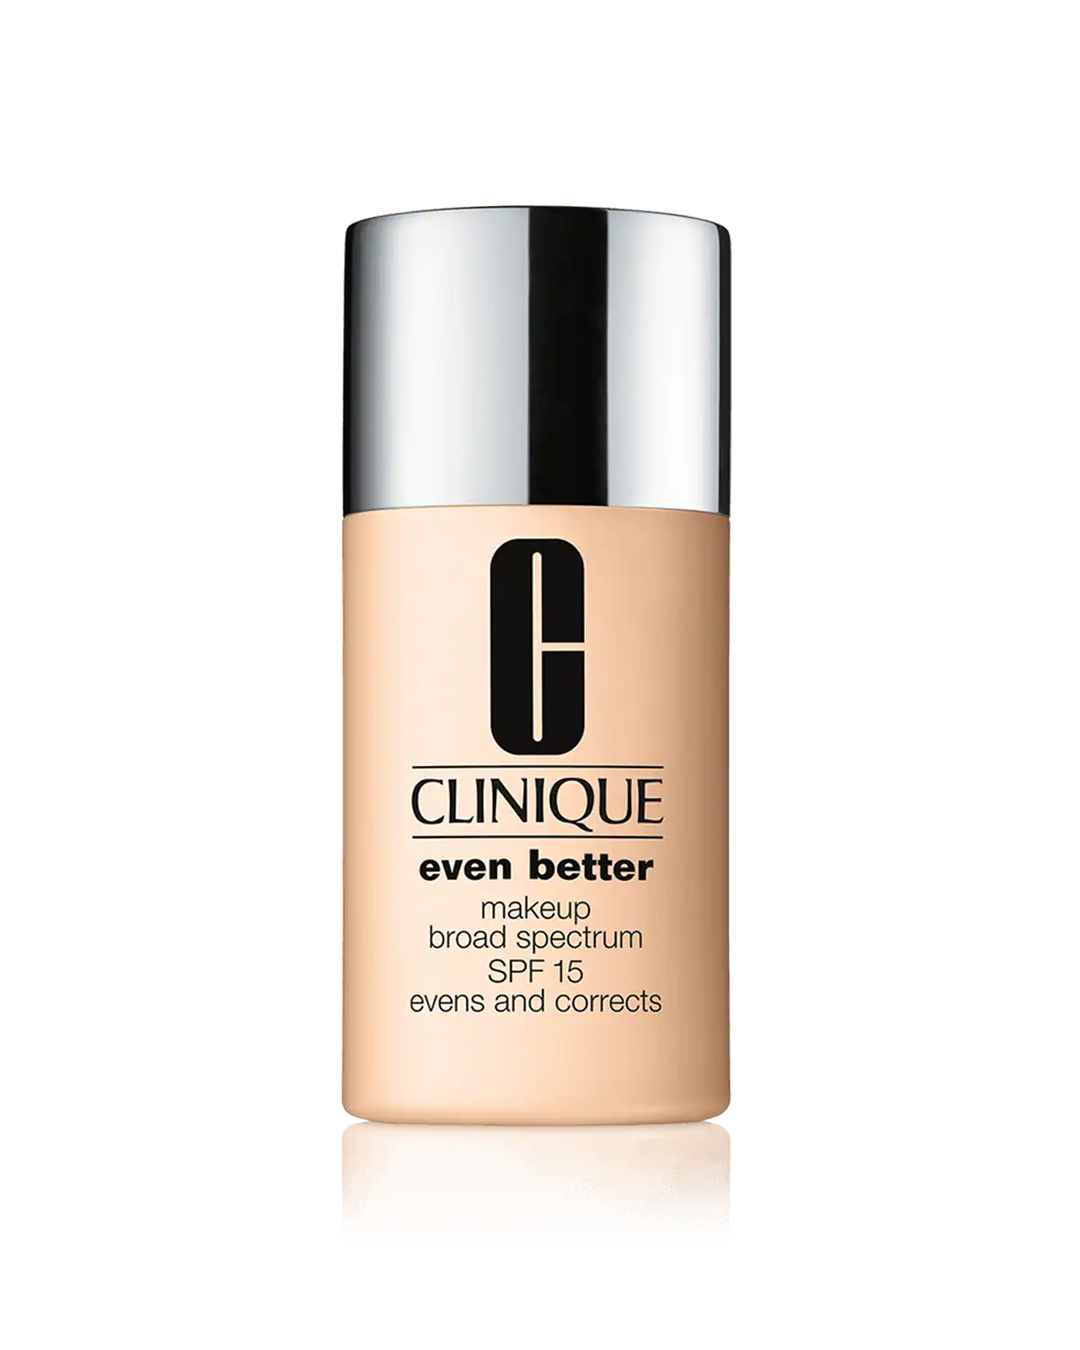 Shop The Latest Collection Of Clinique Even Better Makeup Broad Spectrum Spf 15 In Lebanon